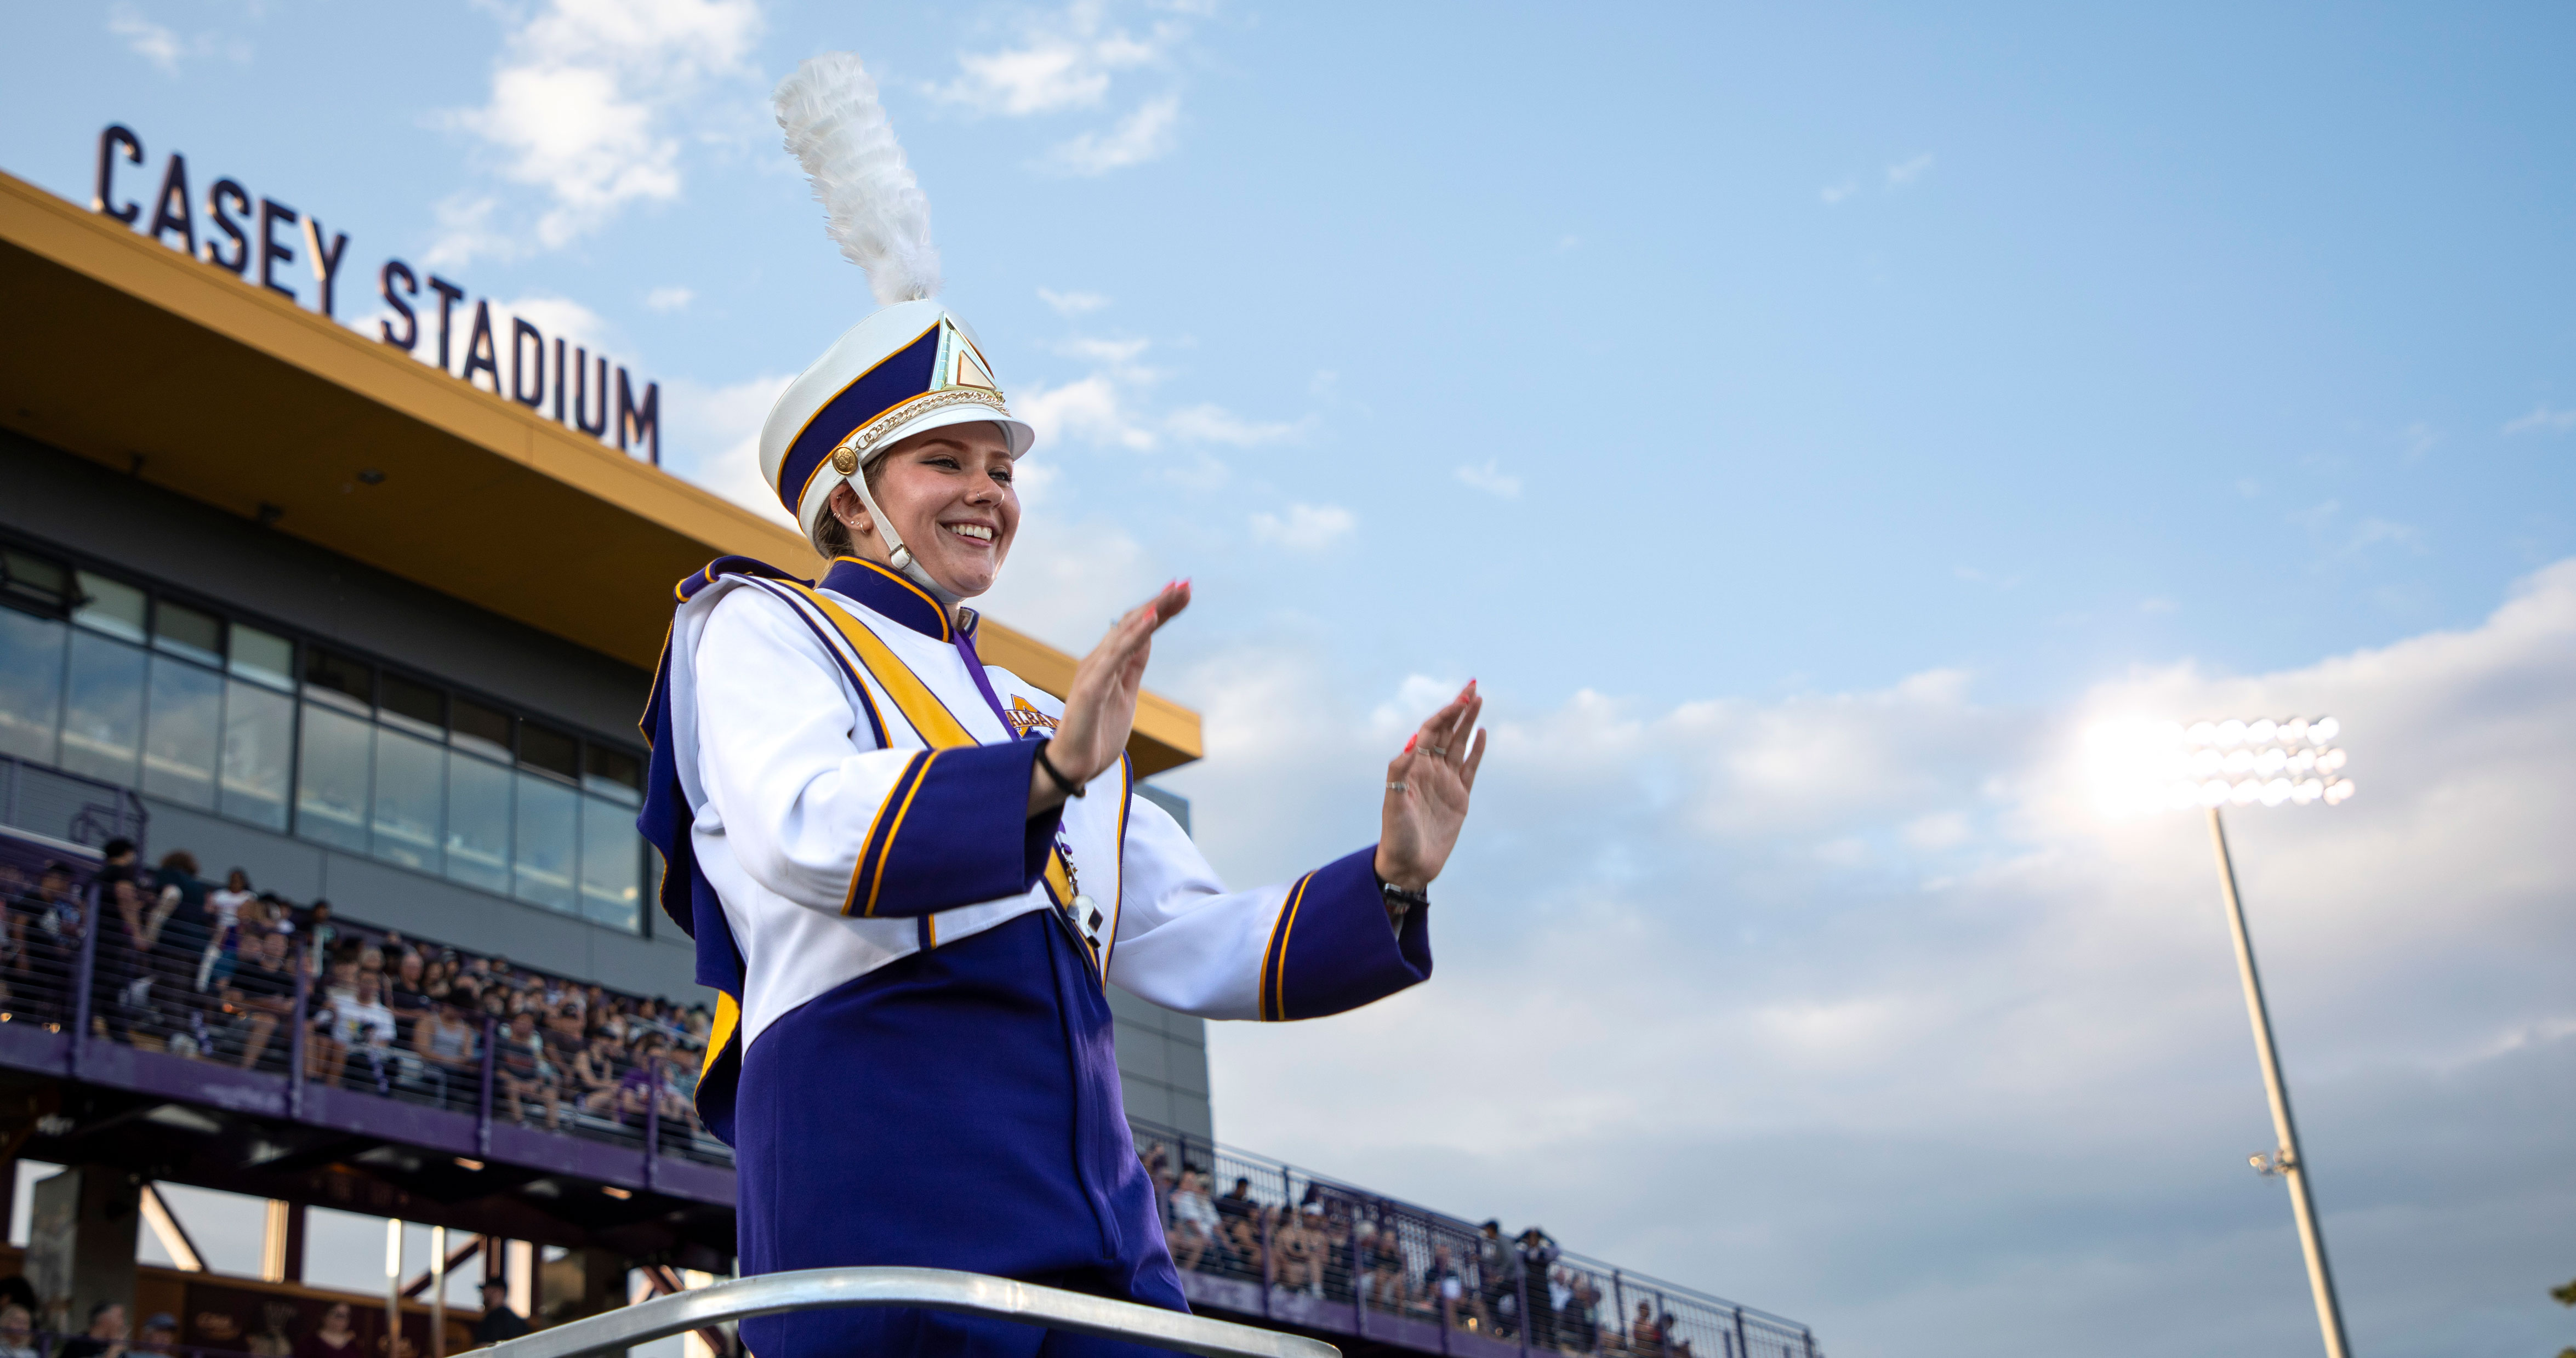 The Marching Great Danes' drum major directs the band from a raised platform in Casey Stadium.